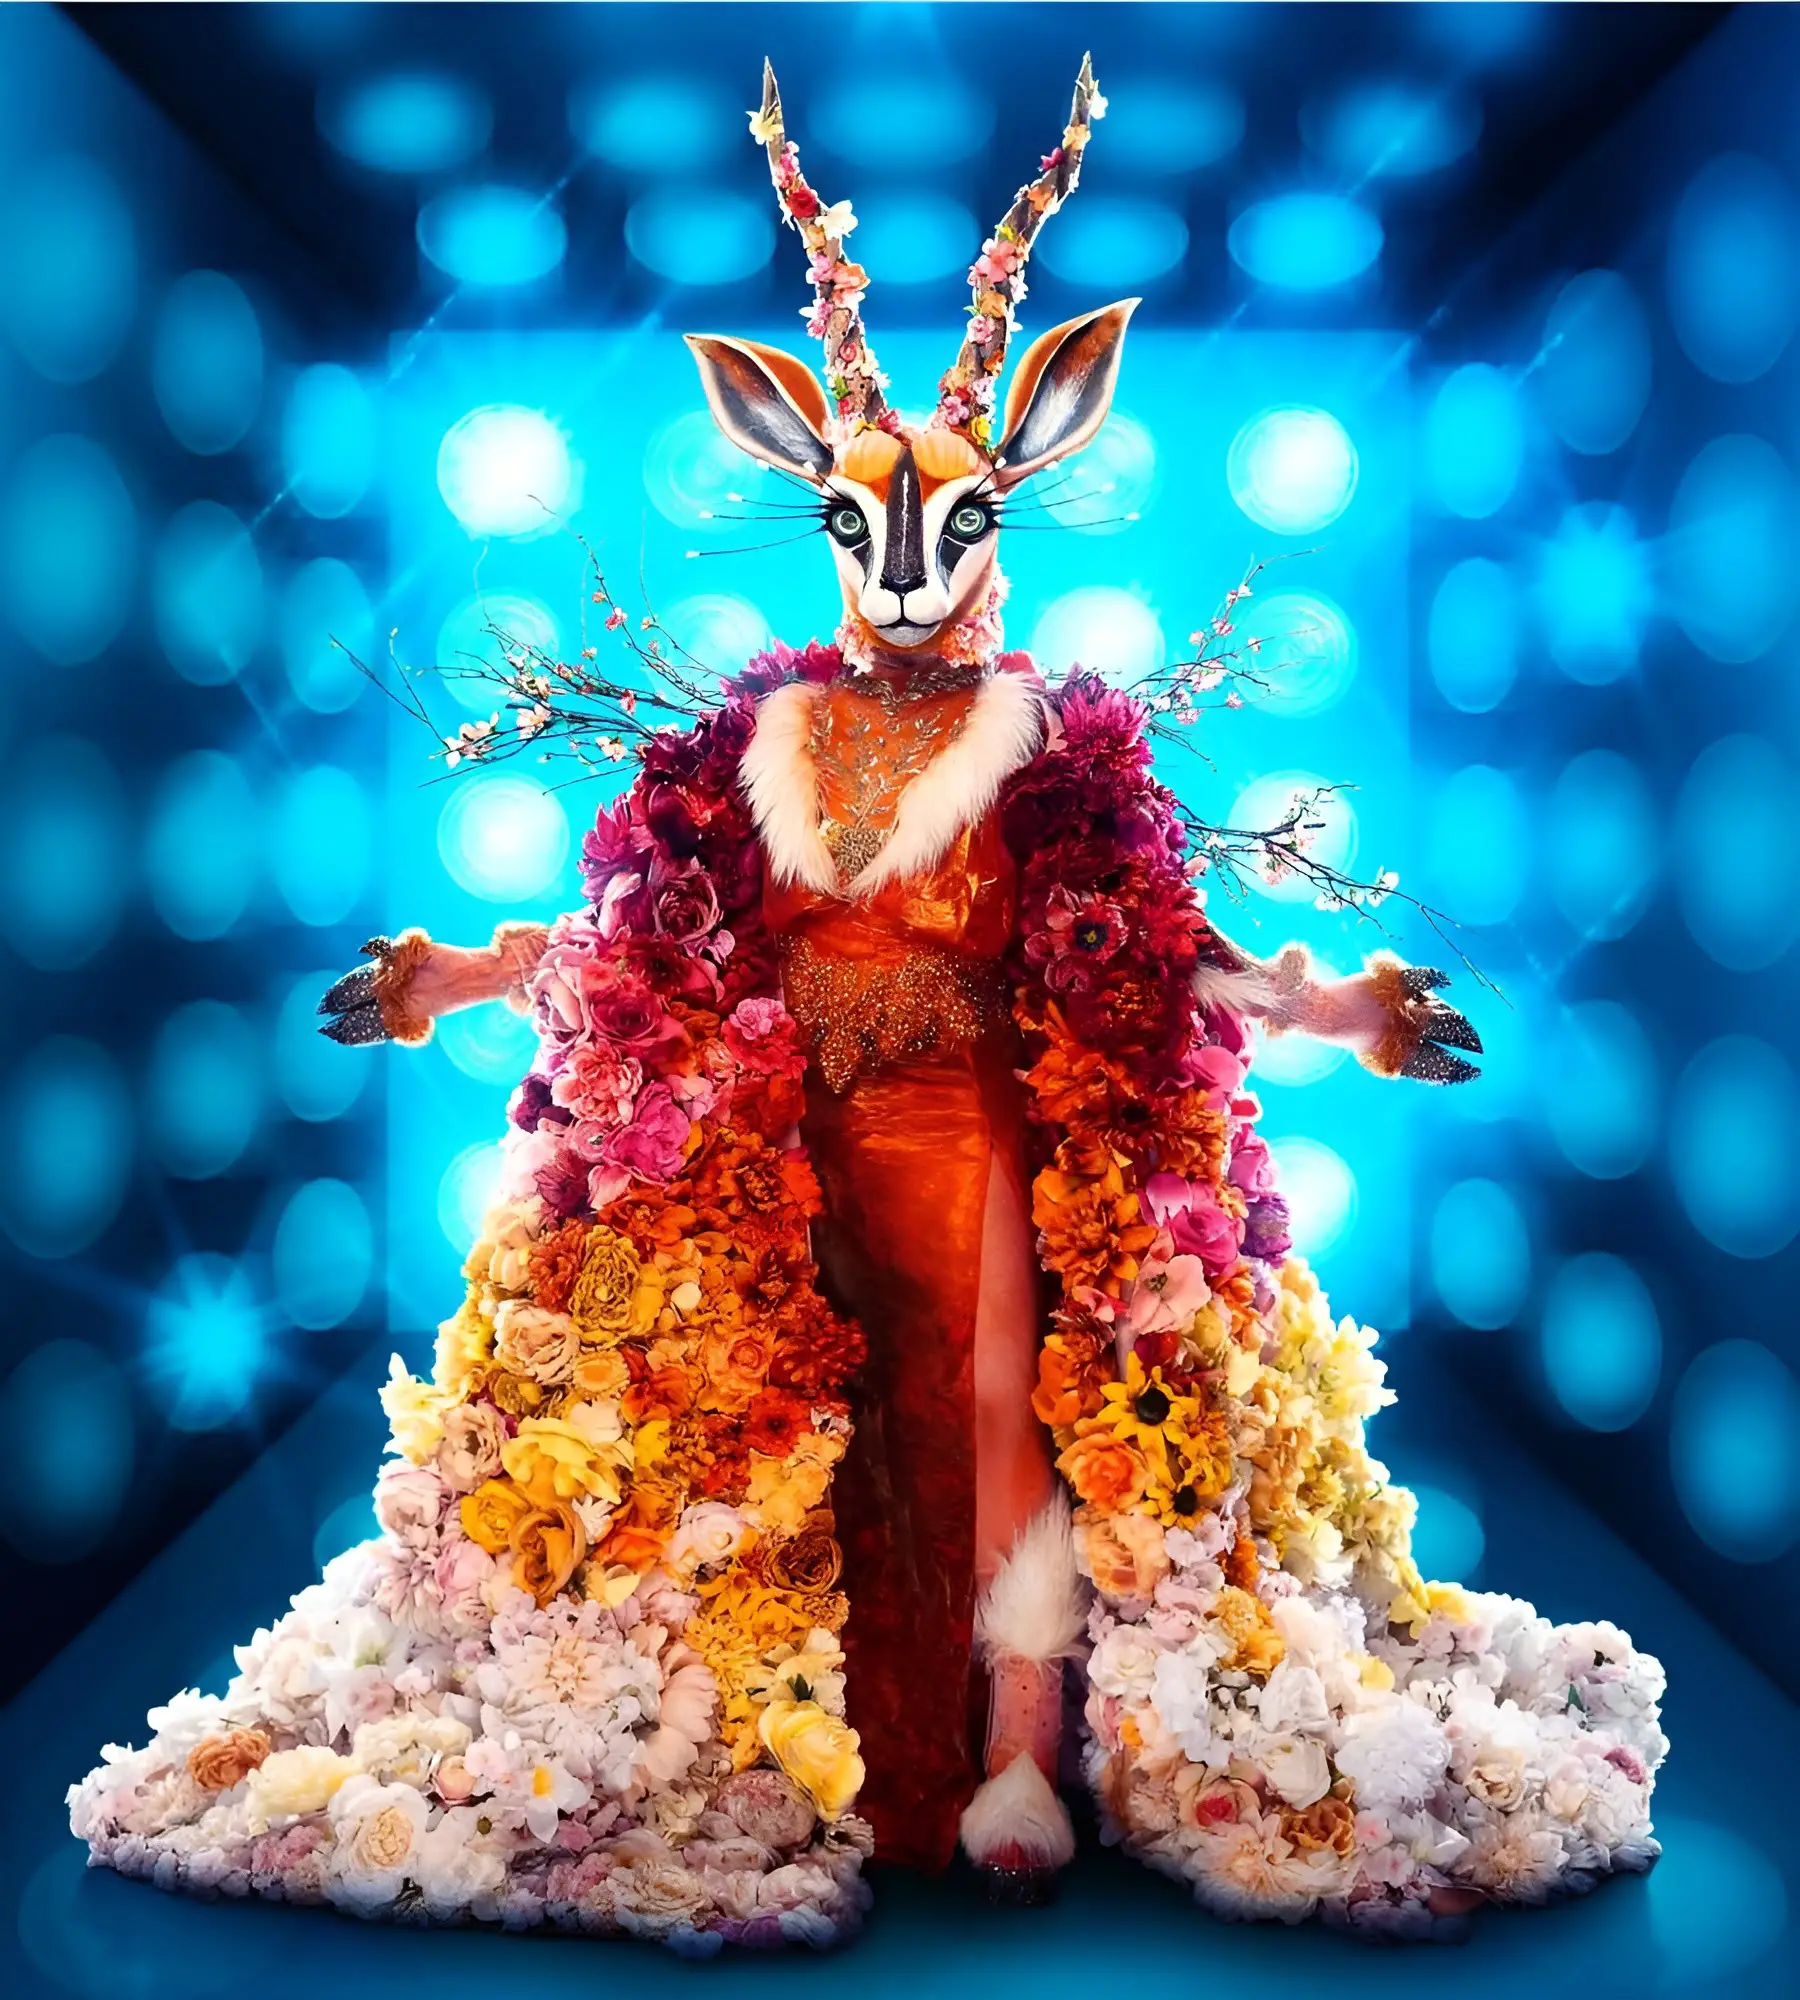 Gazelle on The Masked Singer Season 10 Revealing the Face Behind the